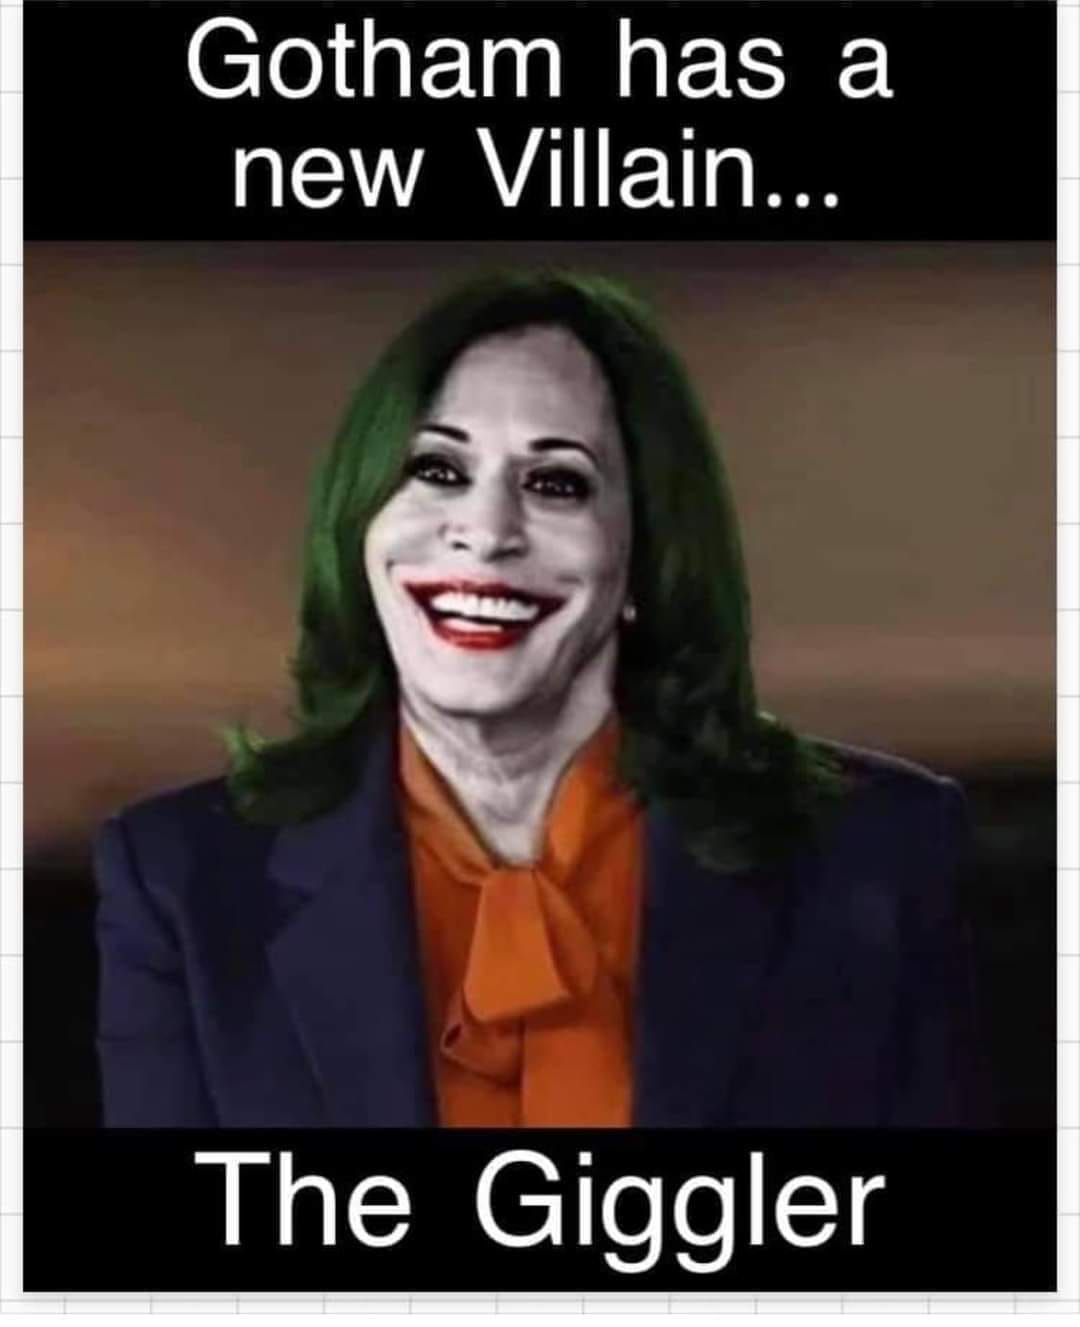 May be an image of 1 person and text that says 'Gotham has a new Villain... The Giggler'